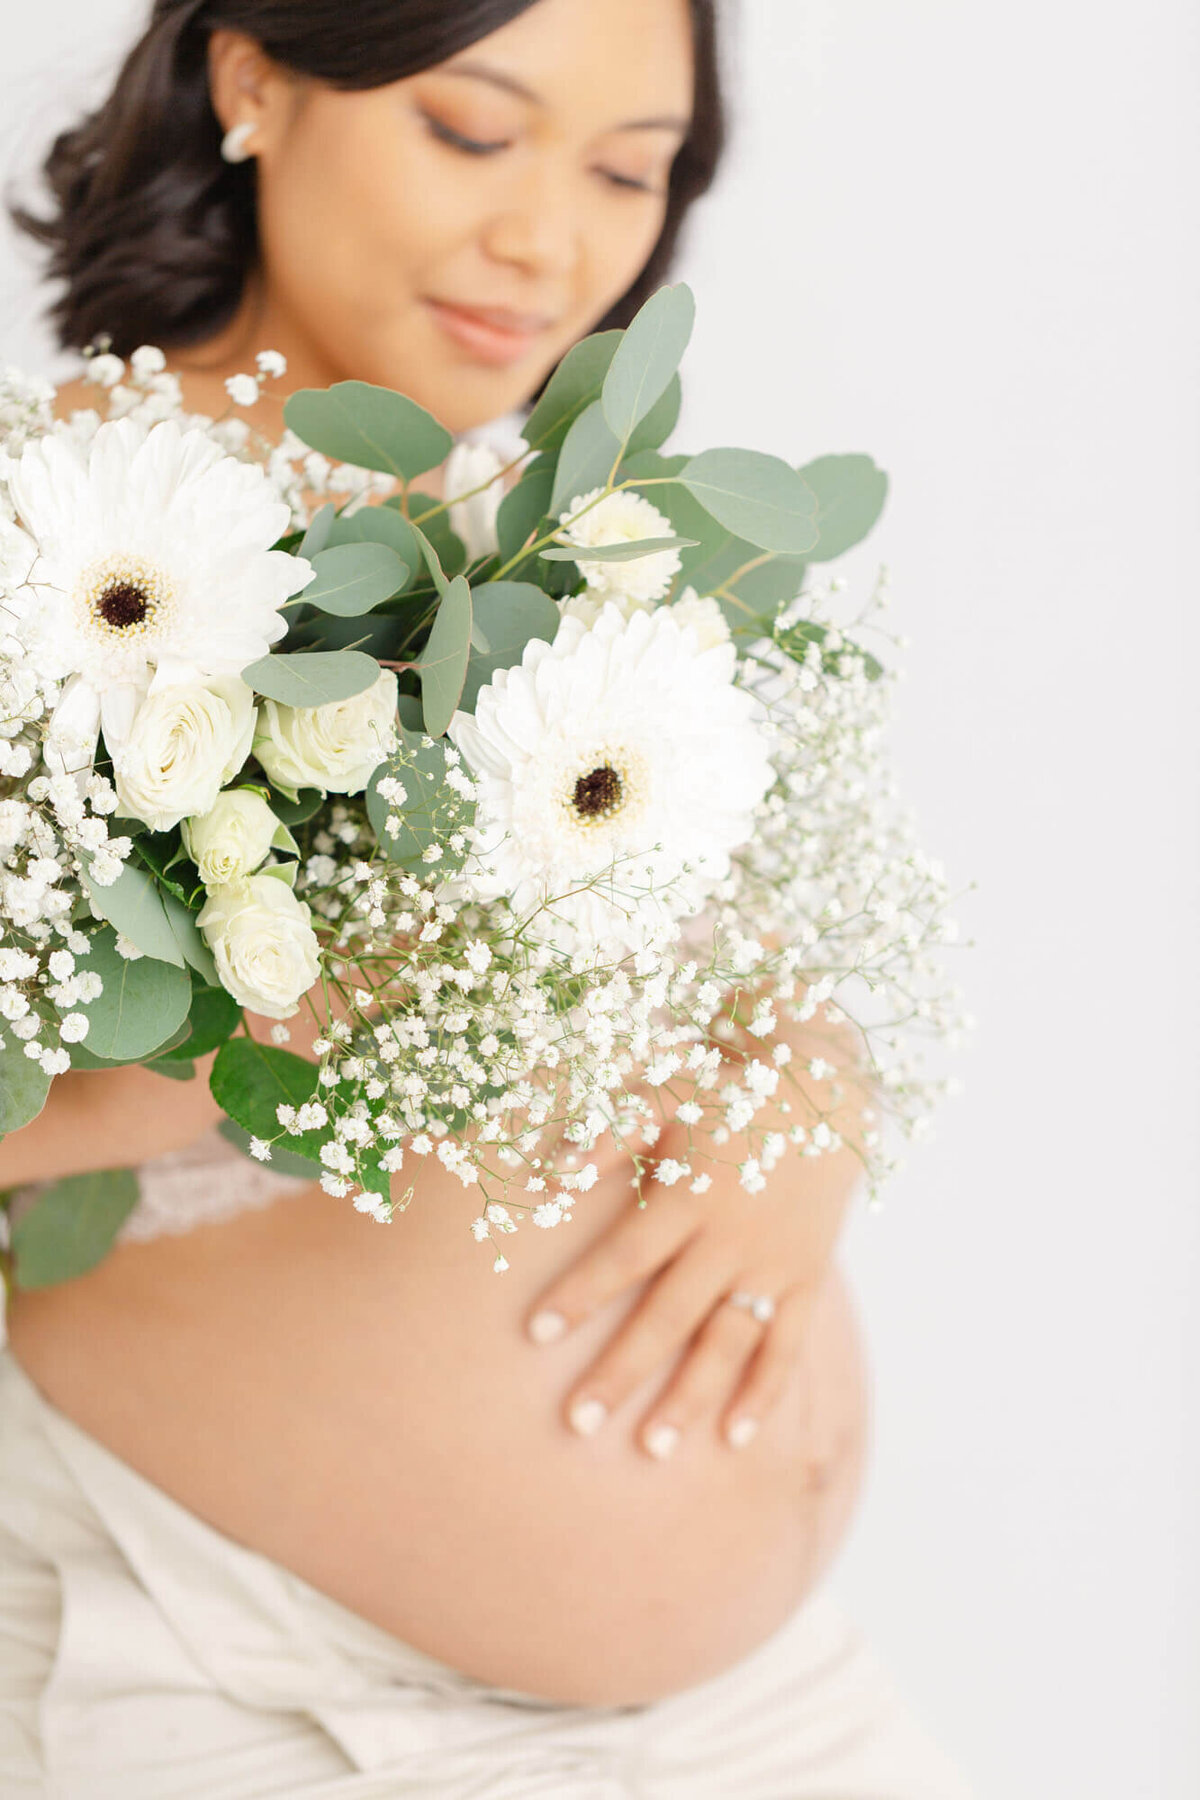 Pregnant Mama holding a bouquet of white flowers in front of her. The flowers are in focus and her face and baby bump are a little softer in the background. She has one hand on her belly.